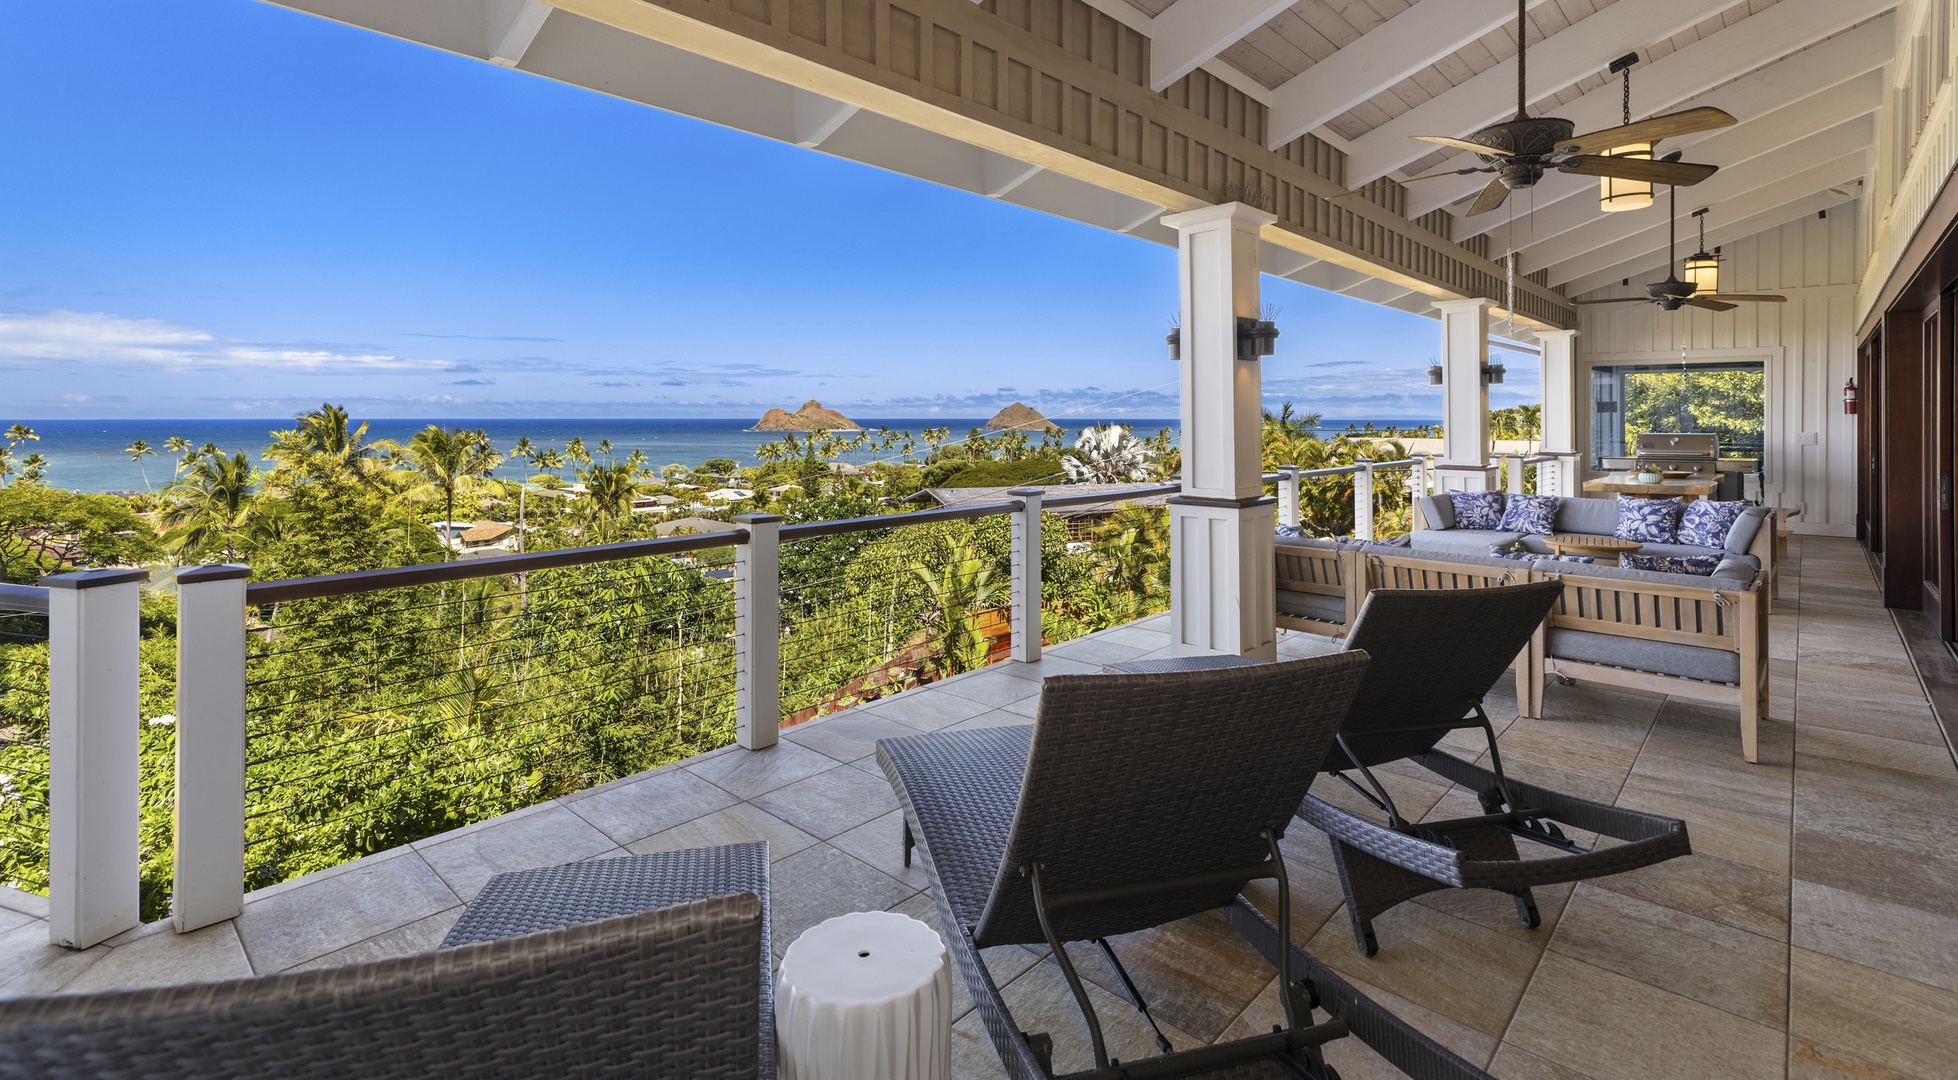 Kailua Vacation Rentals, Lanikai Villa* - Take in the calm, serene vibes with expansive ocean views from your chaise lounge